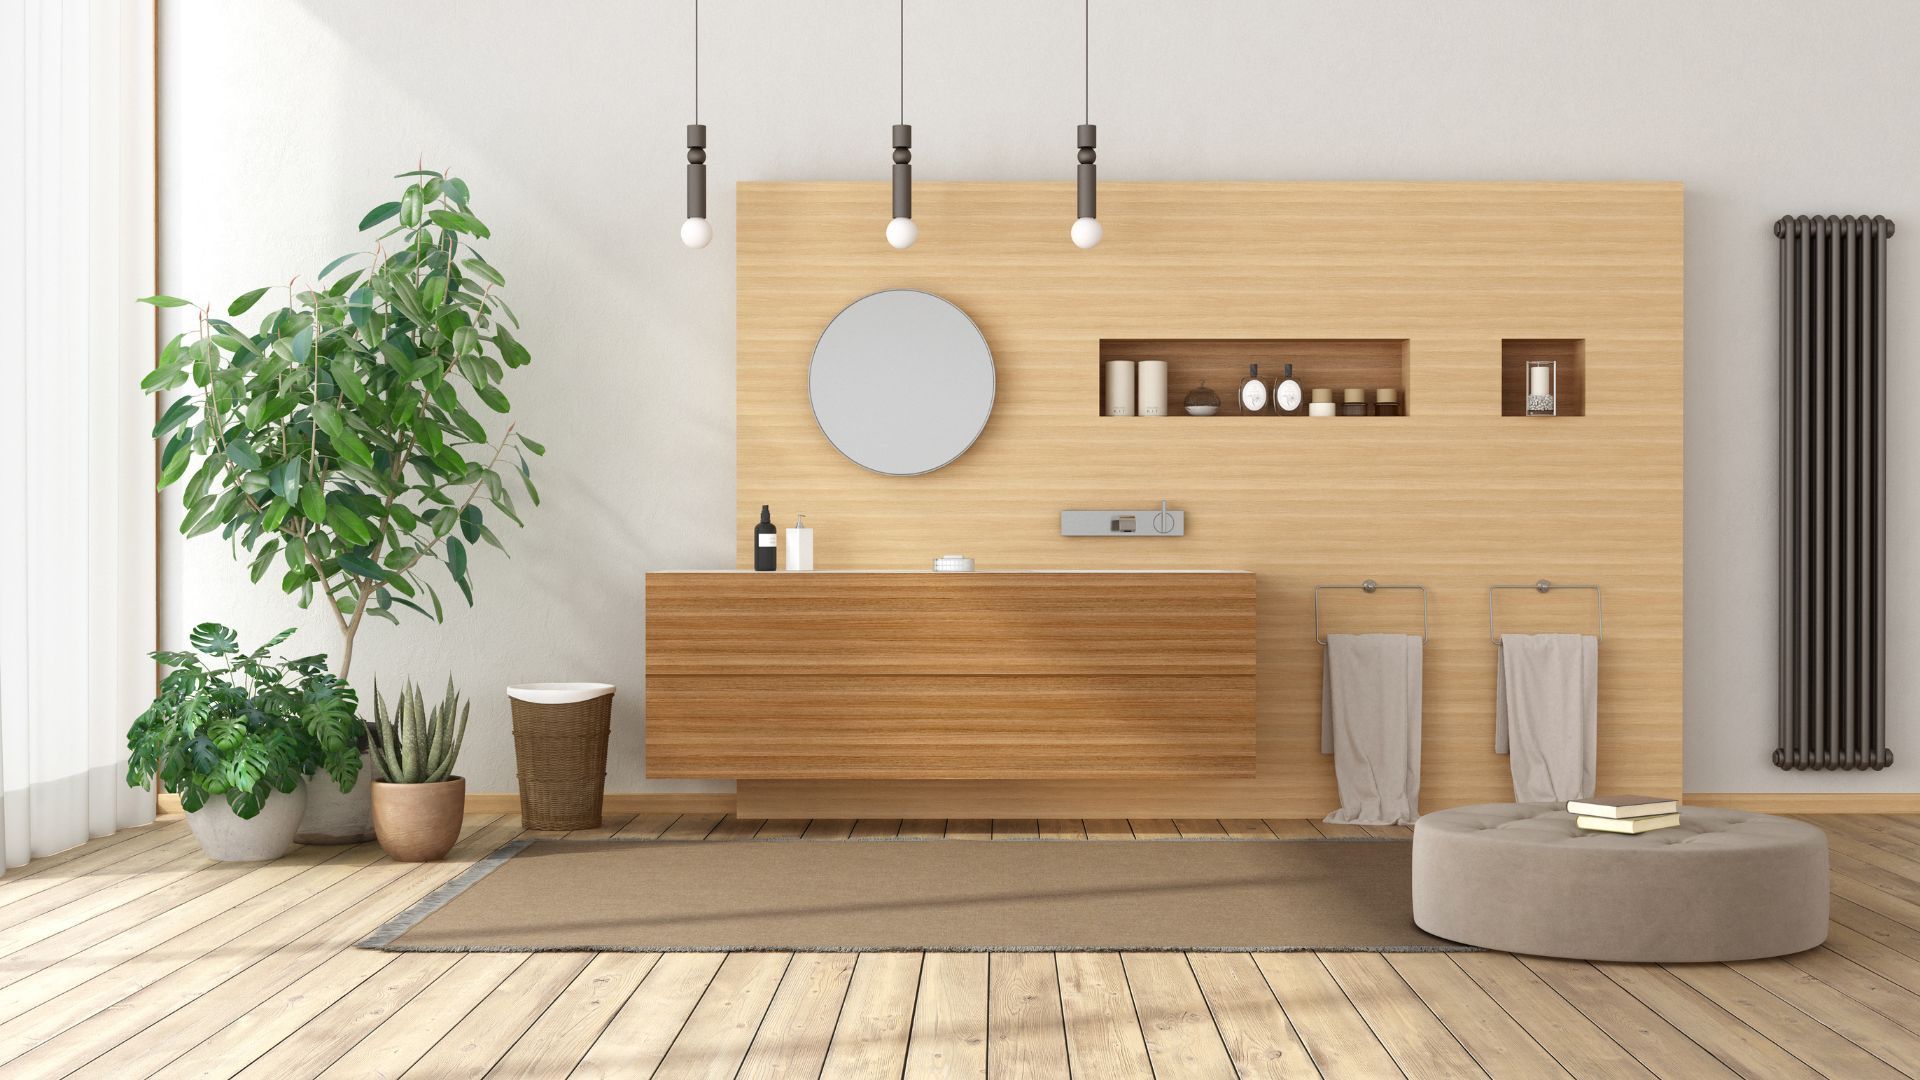 Furniture to decorate your modern bathroom